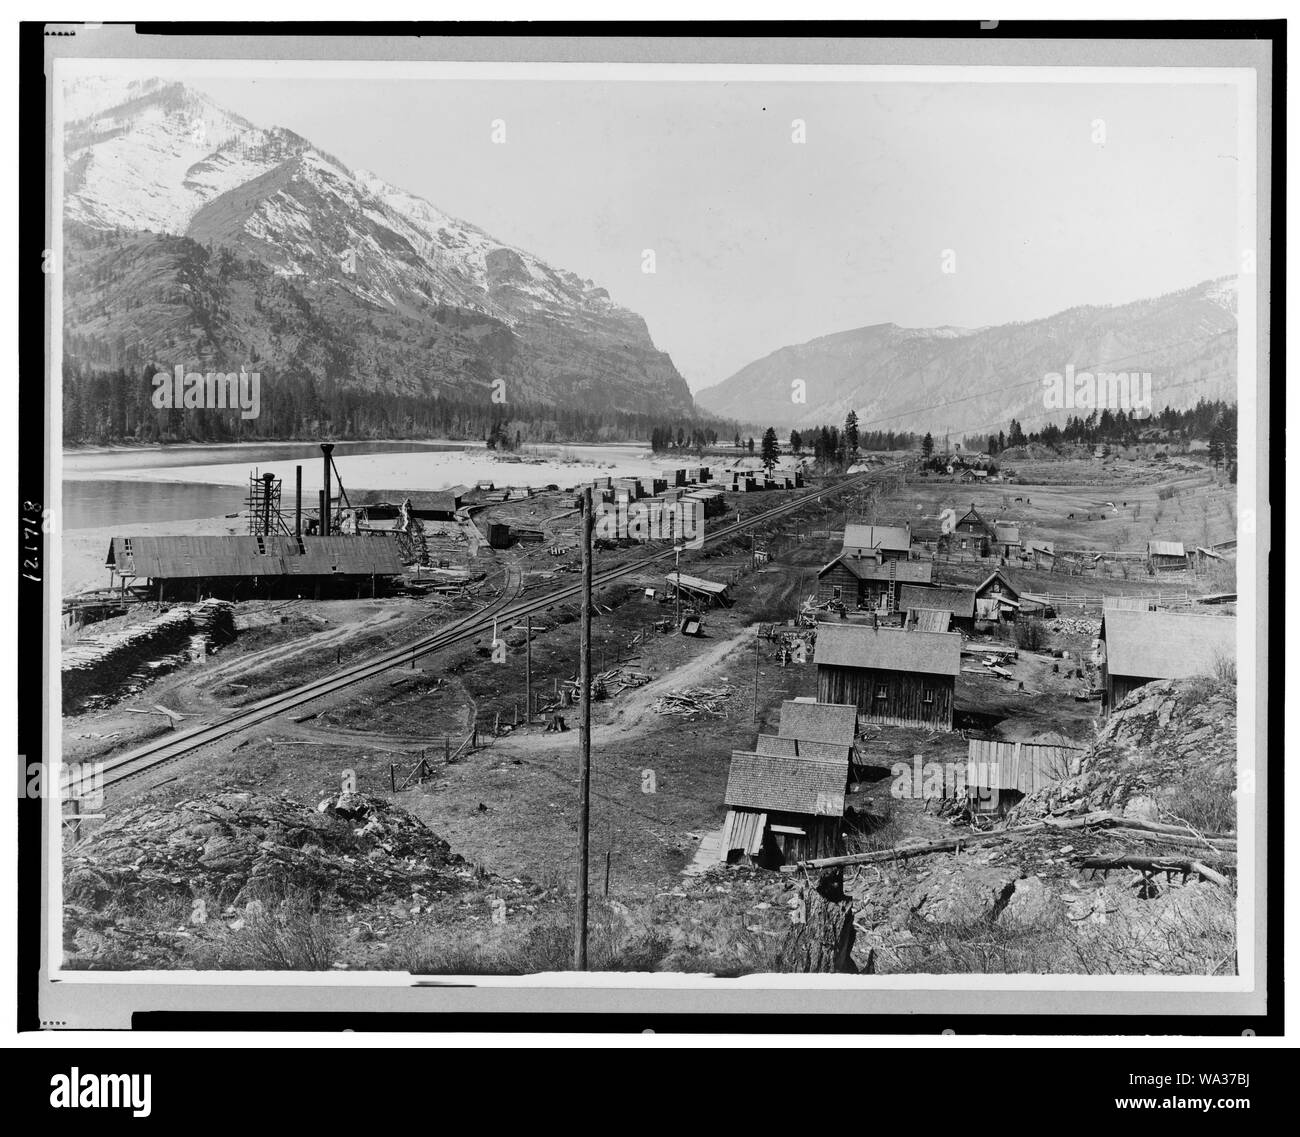 Bird's-eye view of Eddy, Montana, showing buildings, railroad tracks along river, and snow-capped mountains in background Stock Photo